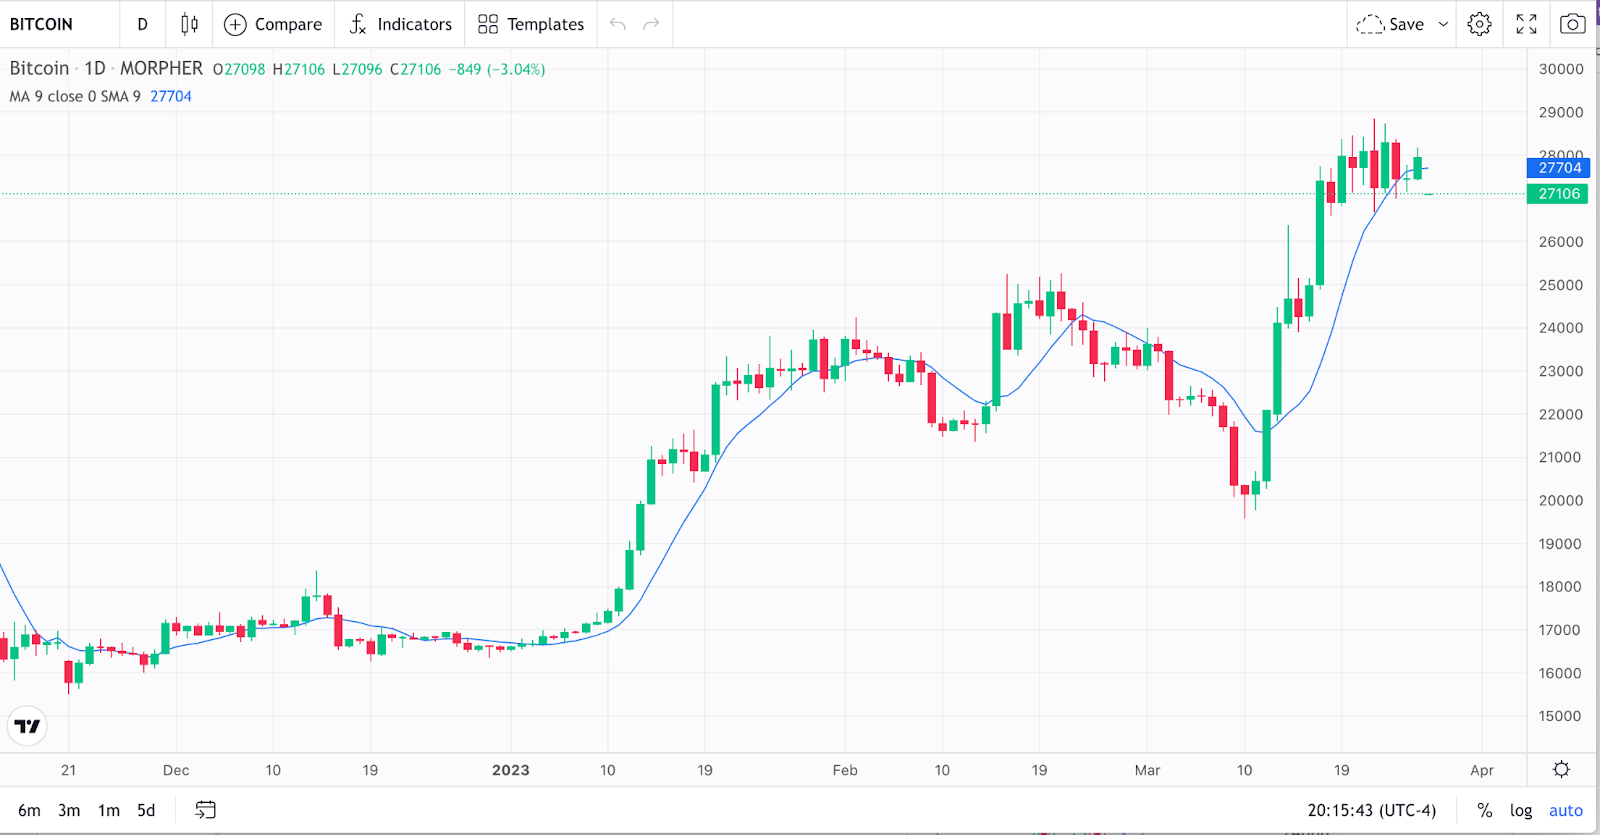 Bitcoin Moving Average on Morpher